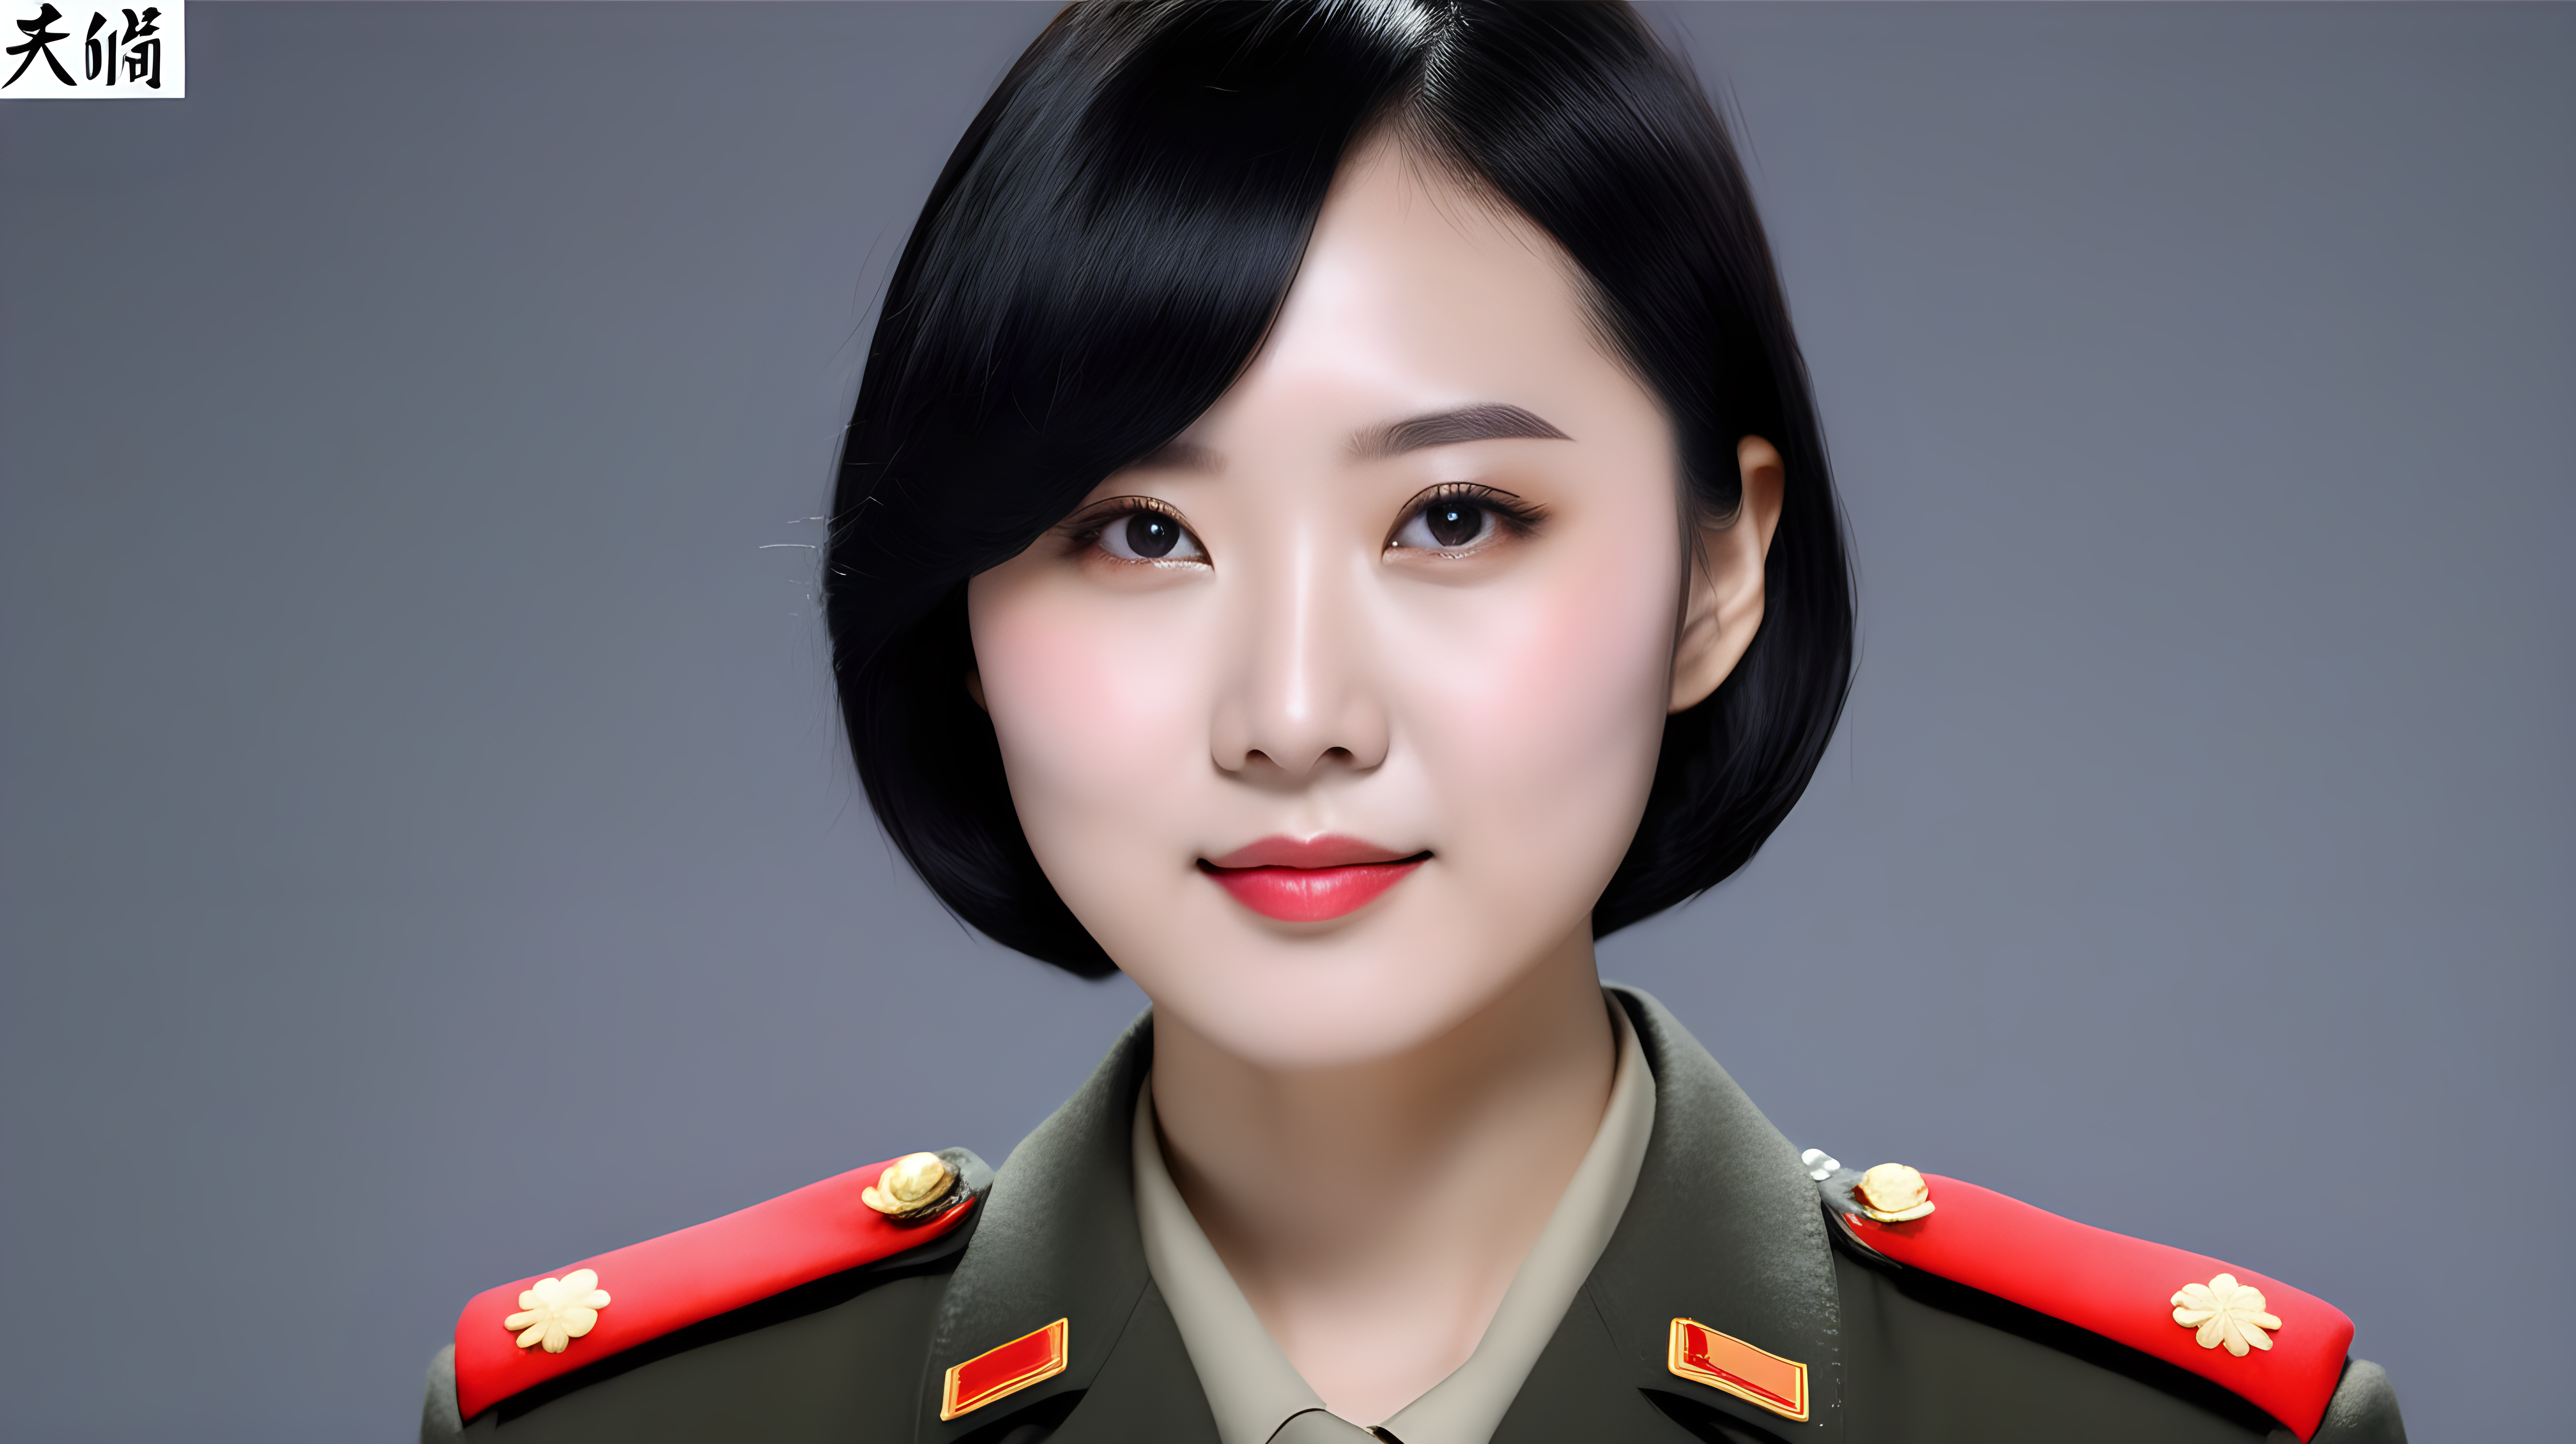 A female soldier of the Chinese Peoples Liberation